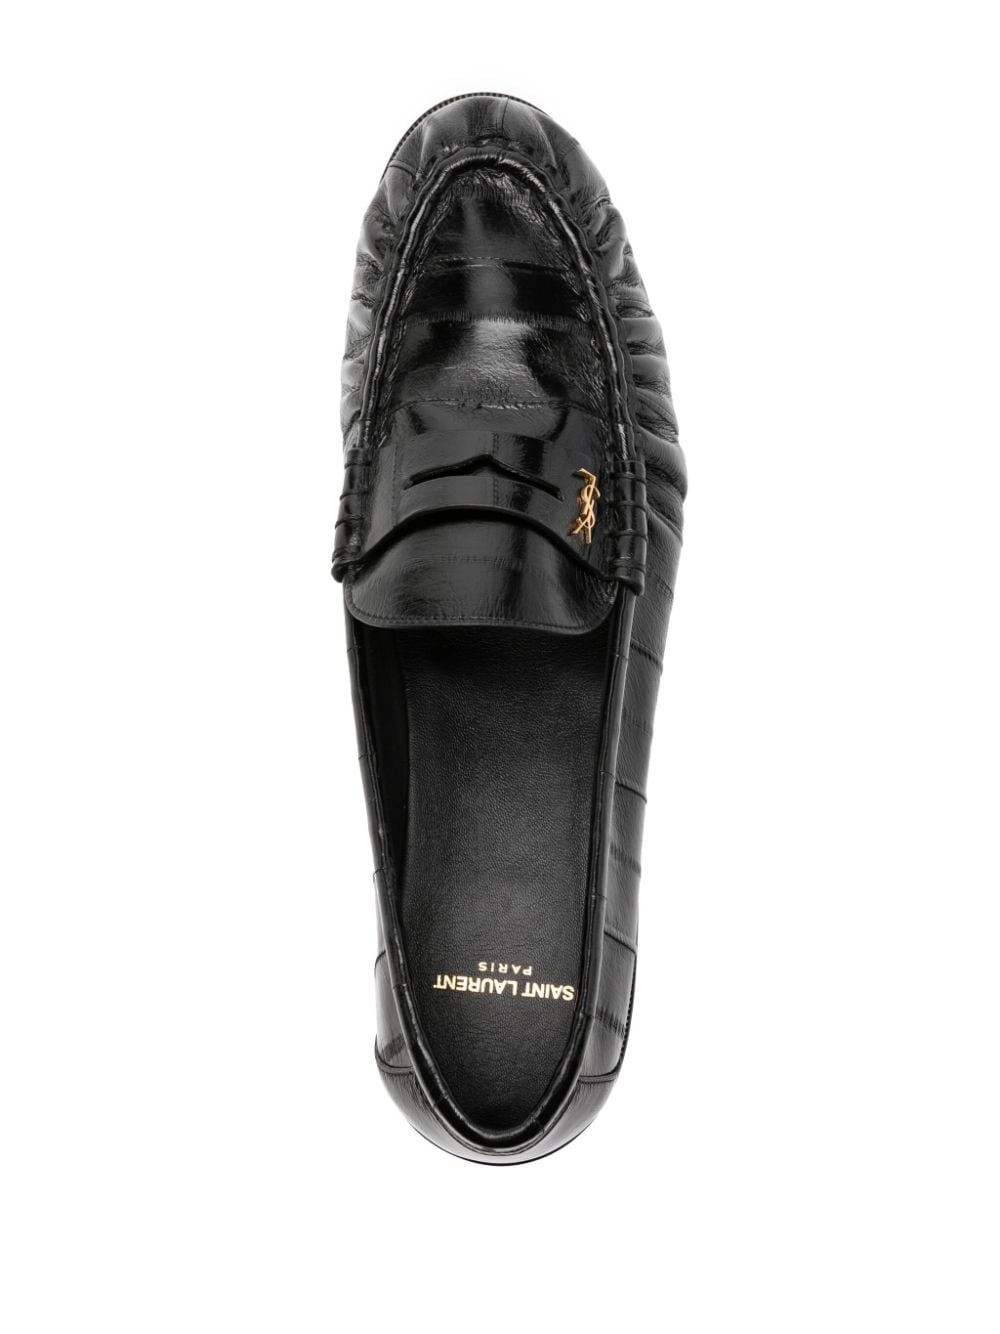 logo-plaque leather loafers - 4